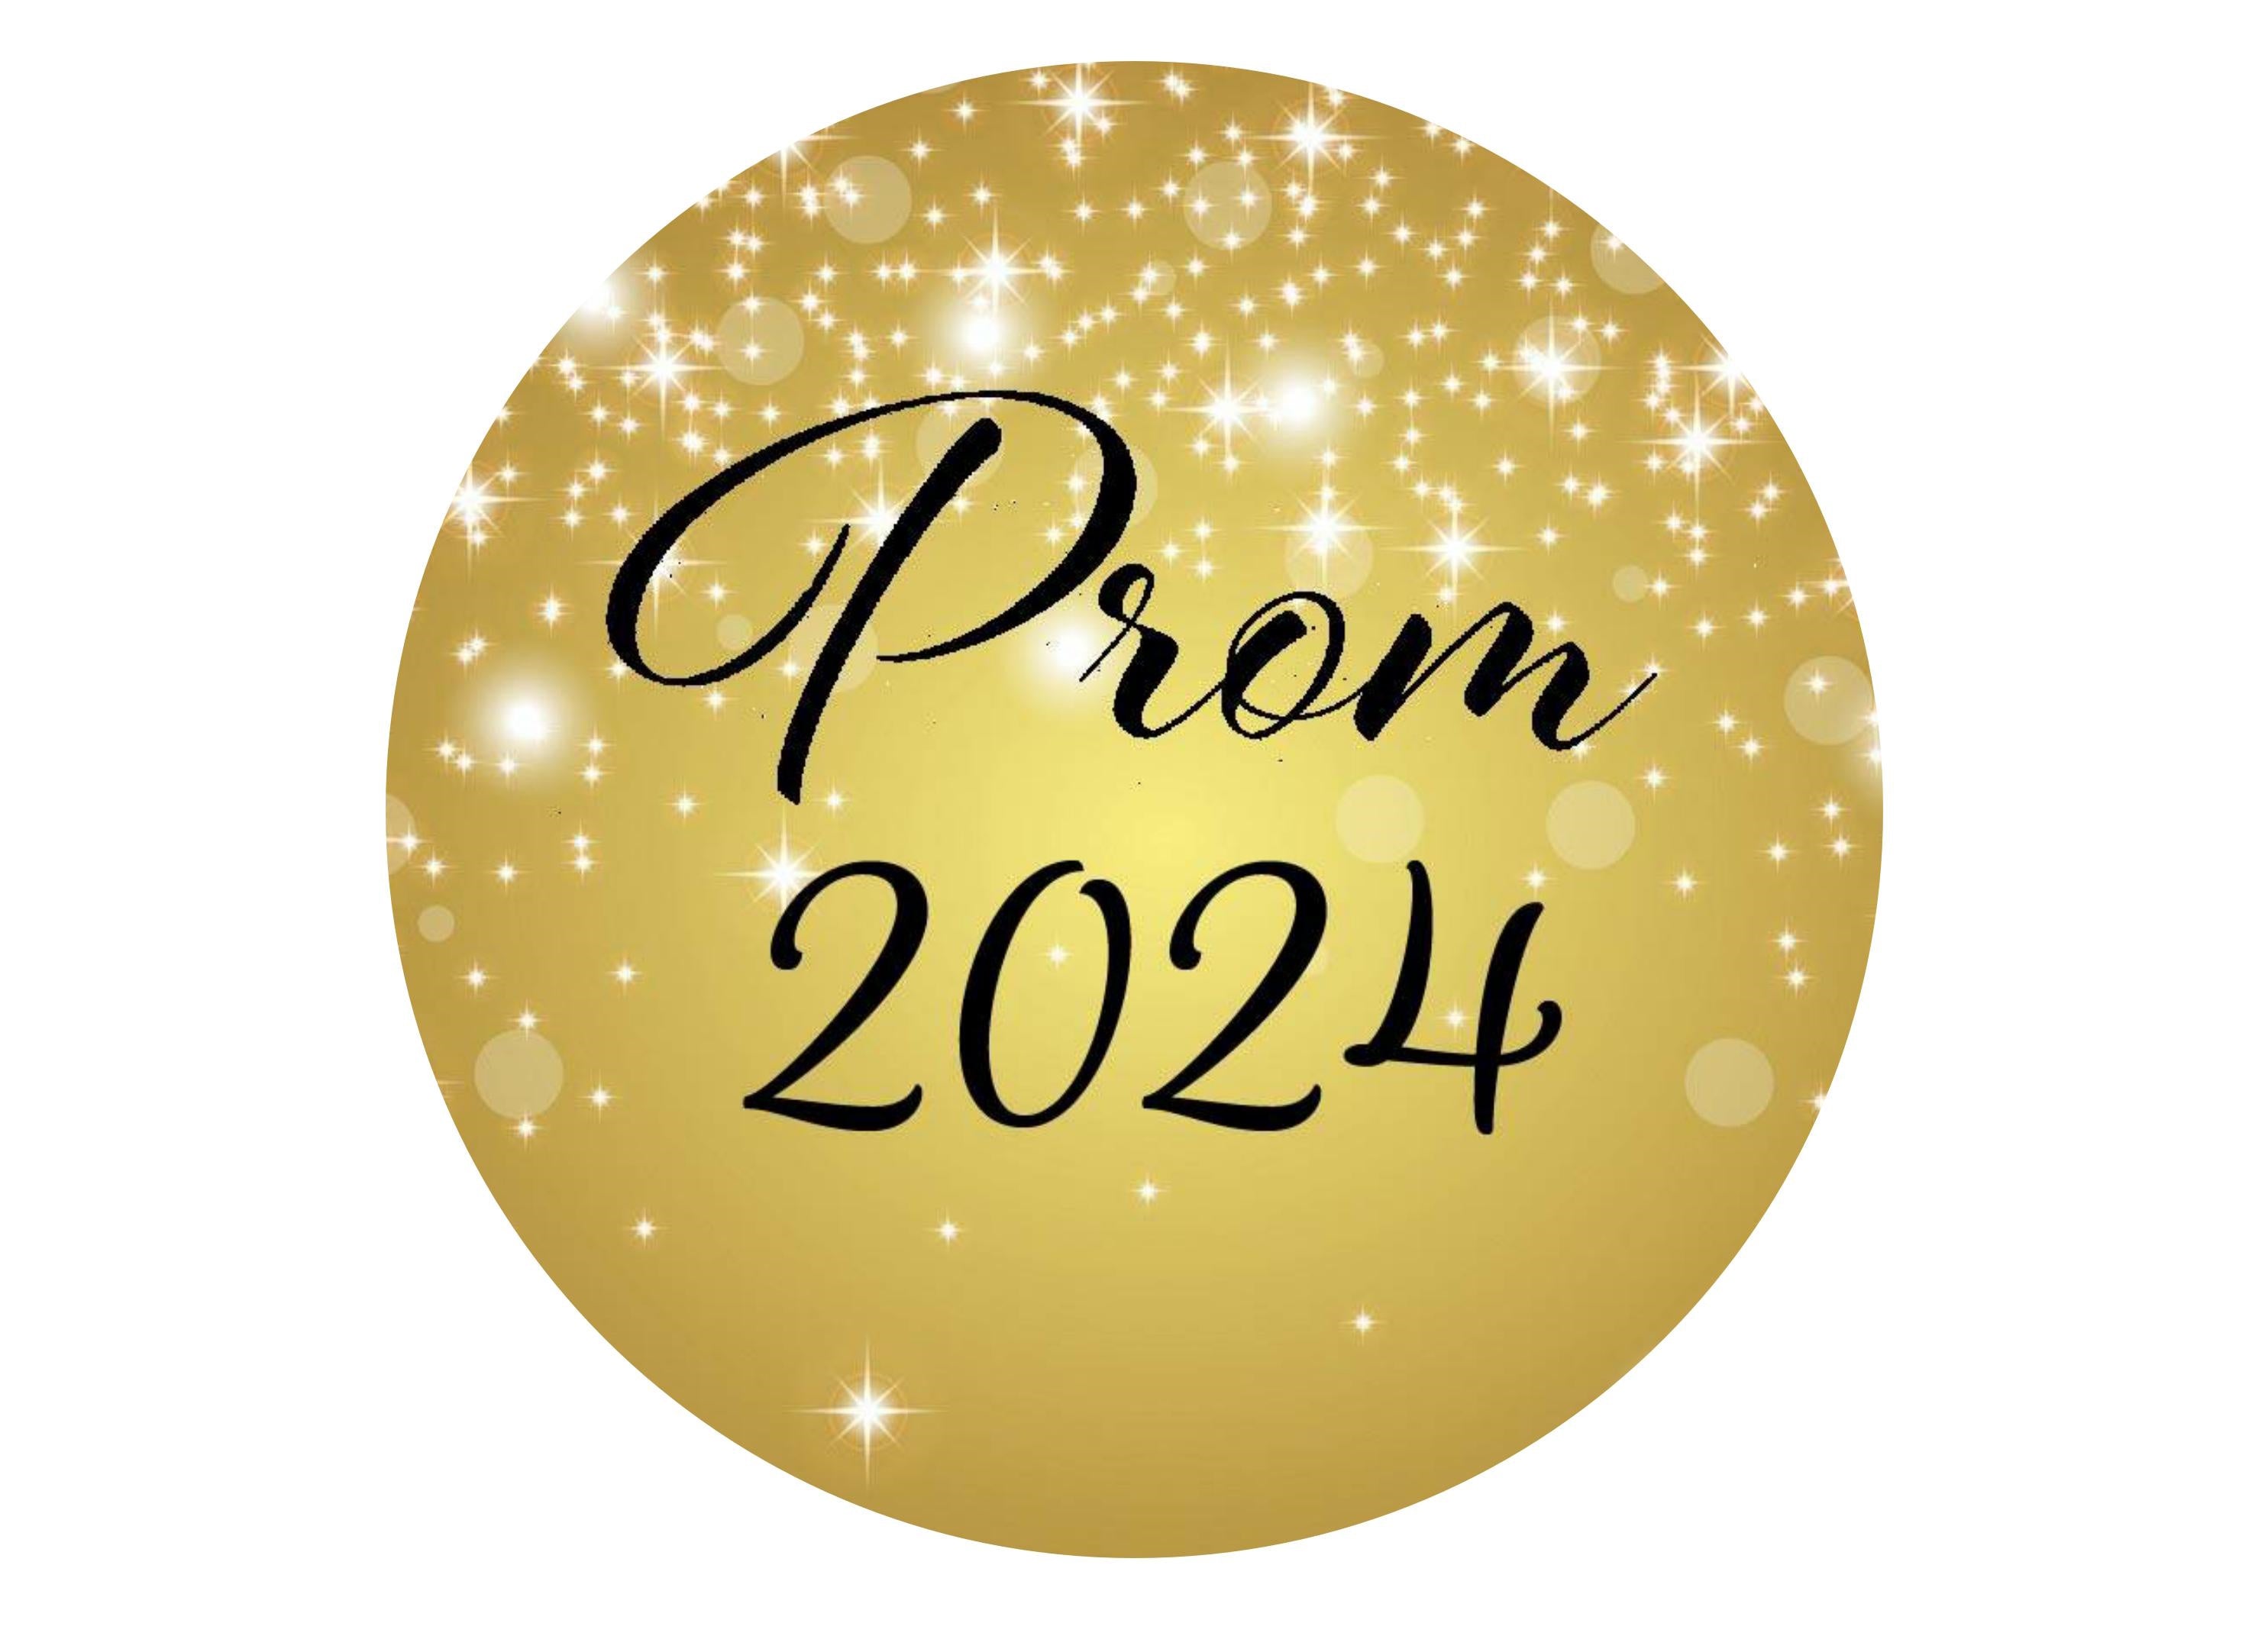 Large cake topper with a gold and black design for Prom 2024